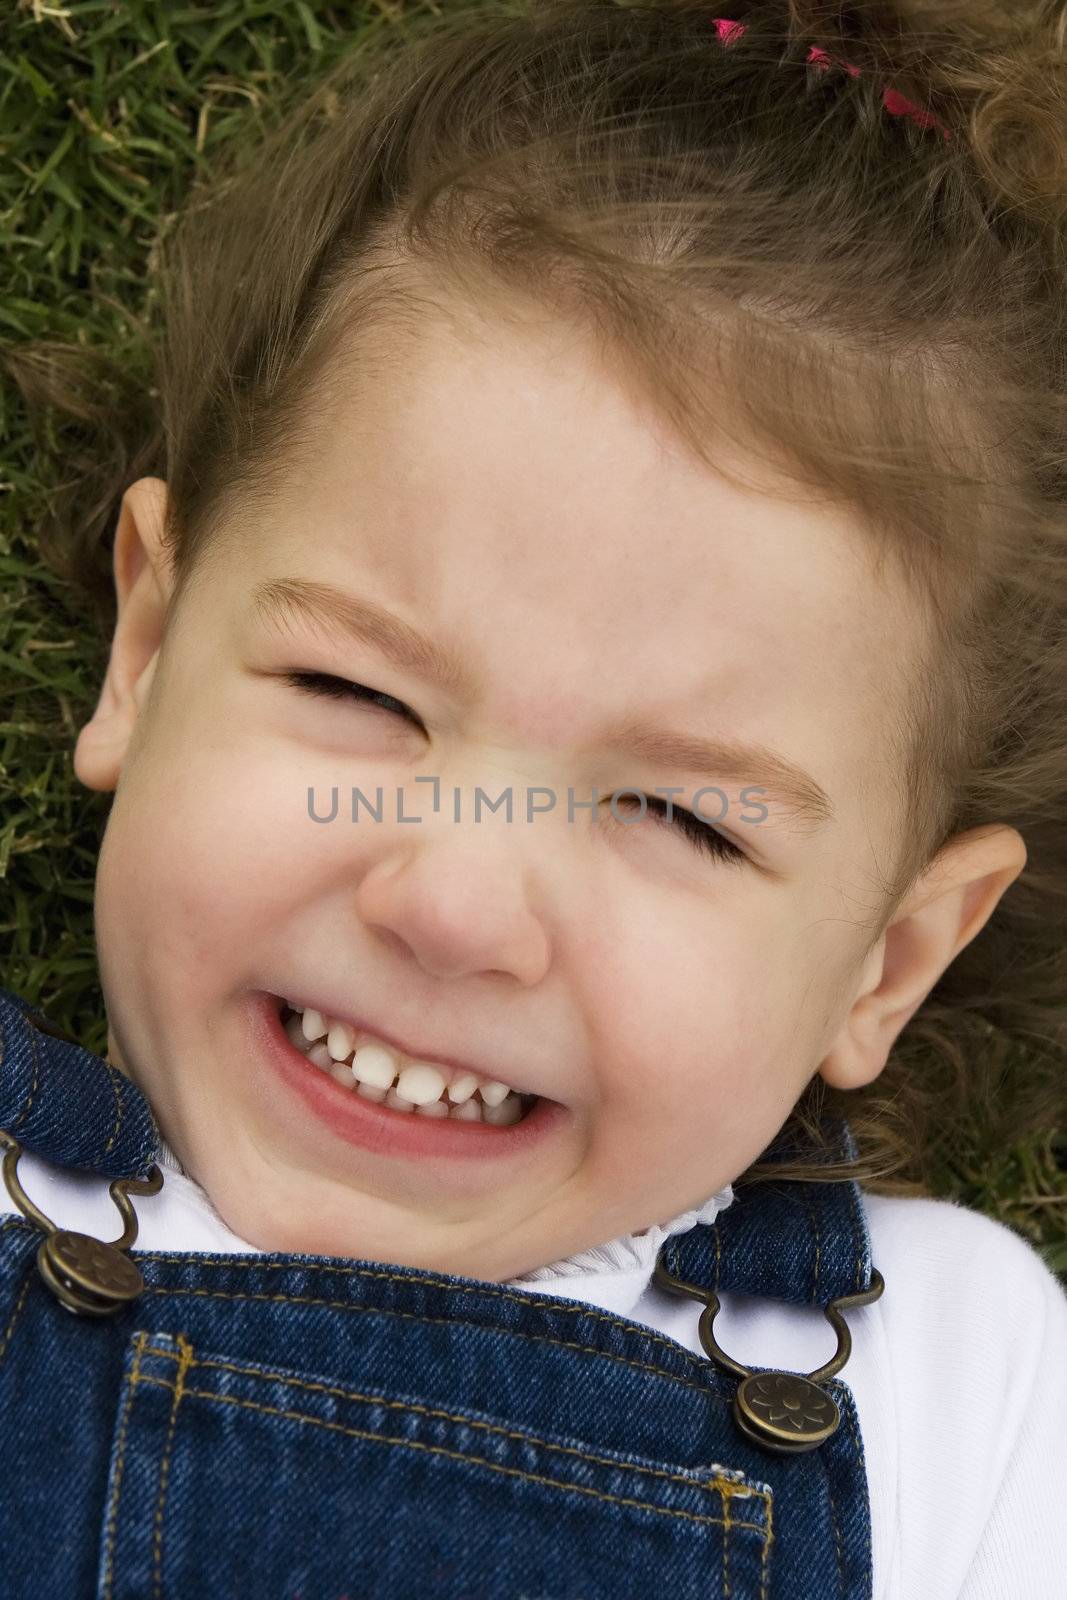 Little girl laying in the grass making a silly face with a big smile.